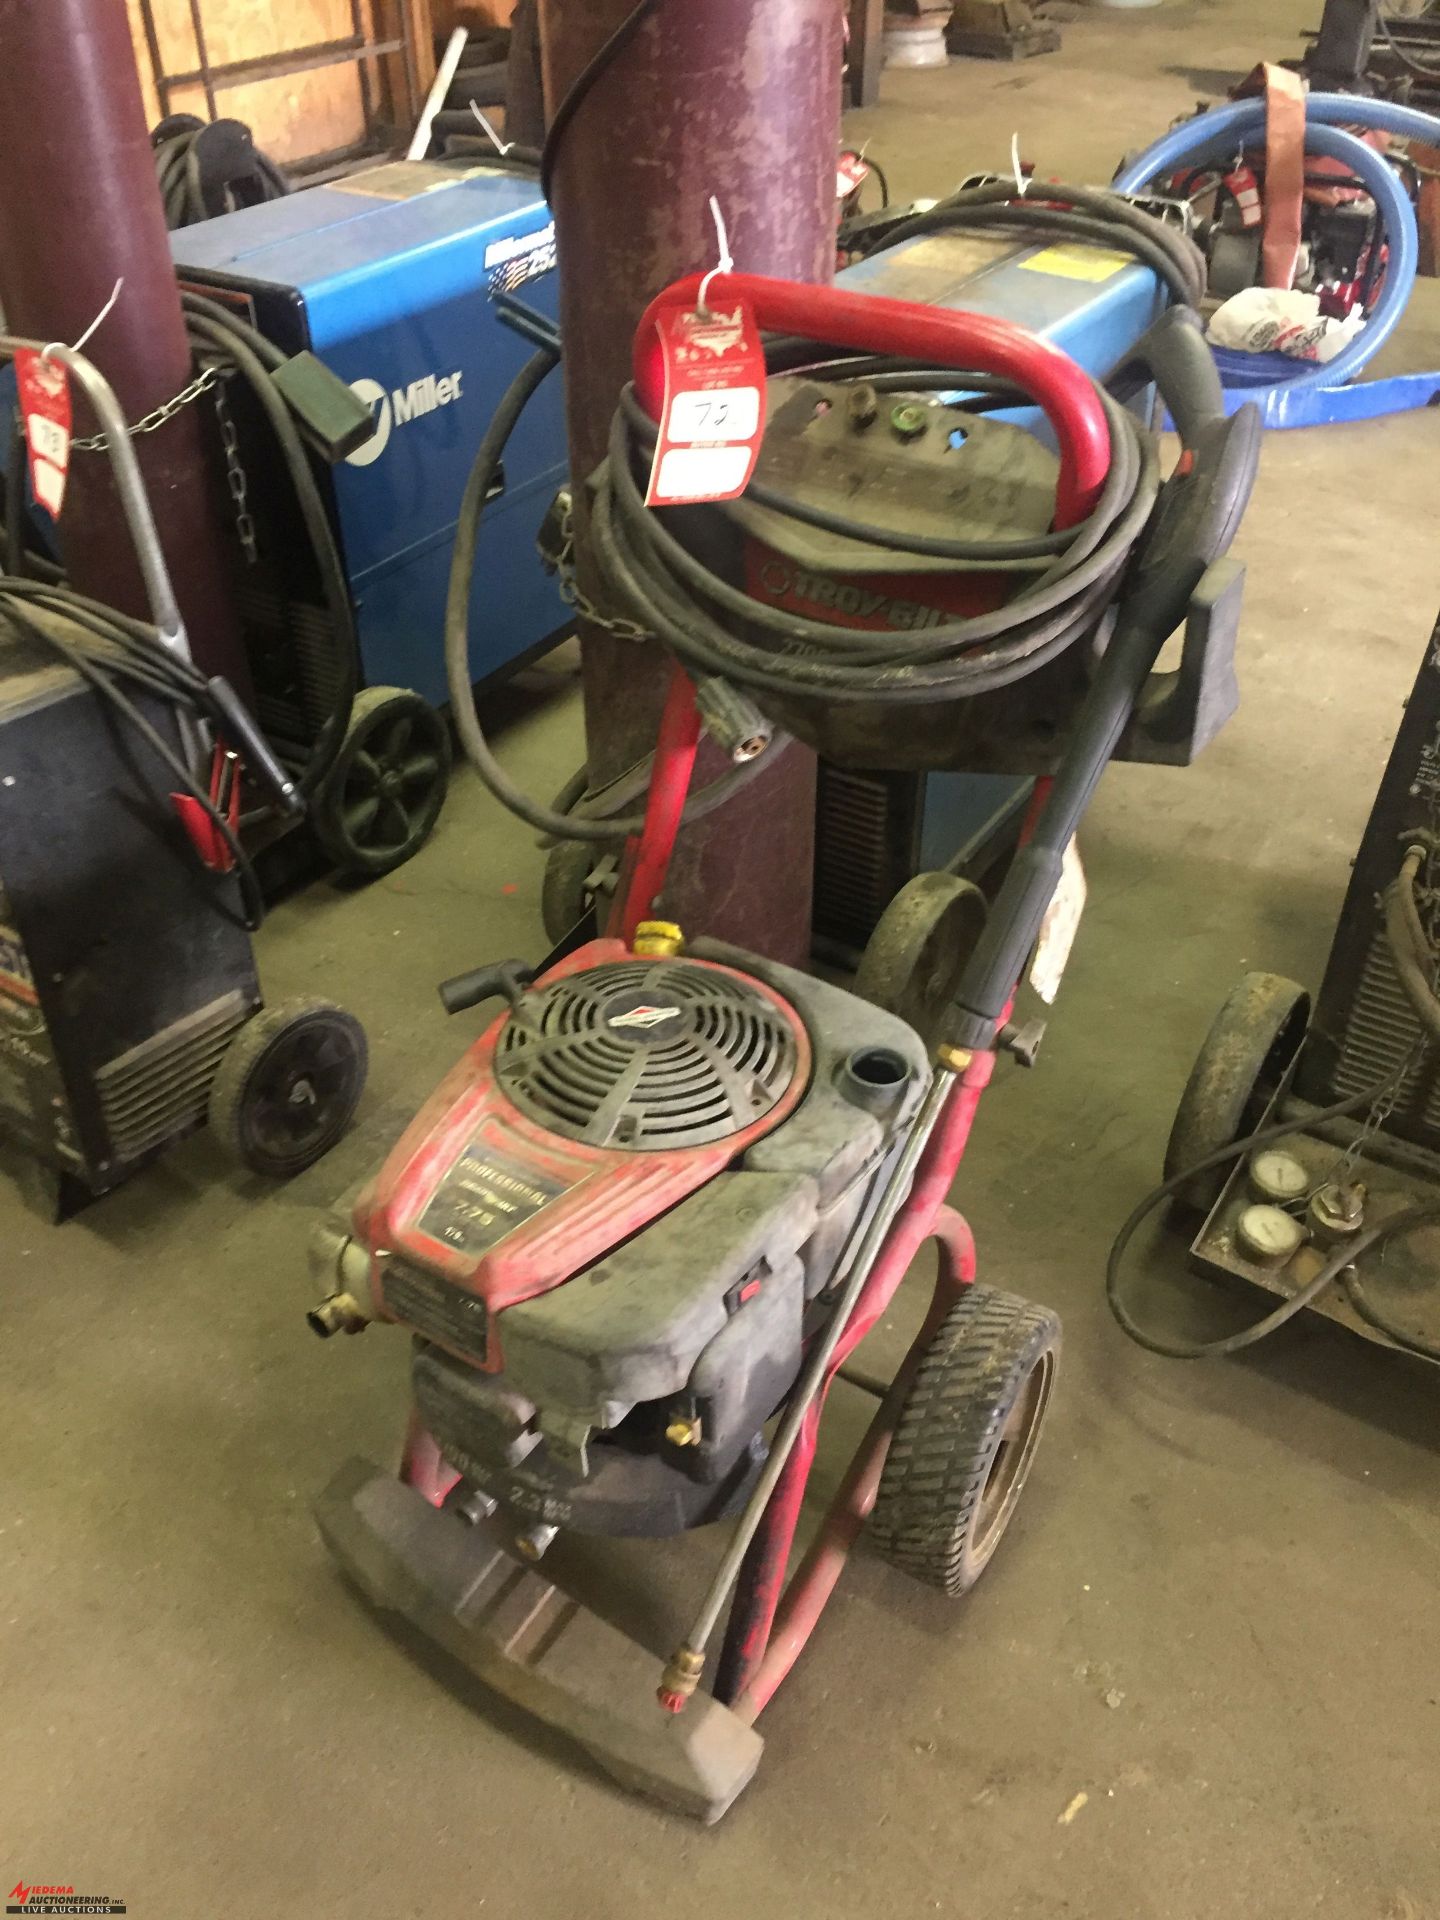 TROY BILT PORTABLE POWER WASHER WITH HOSE/WAND, WORKING CONDITION UNKNOWN [LOCATION: EAST WINANS